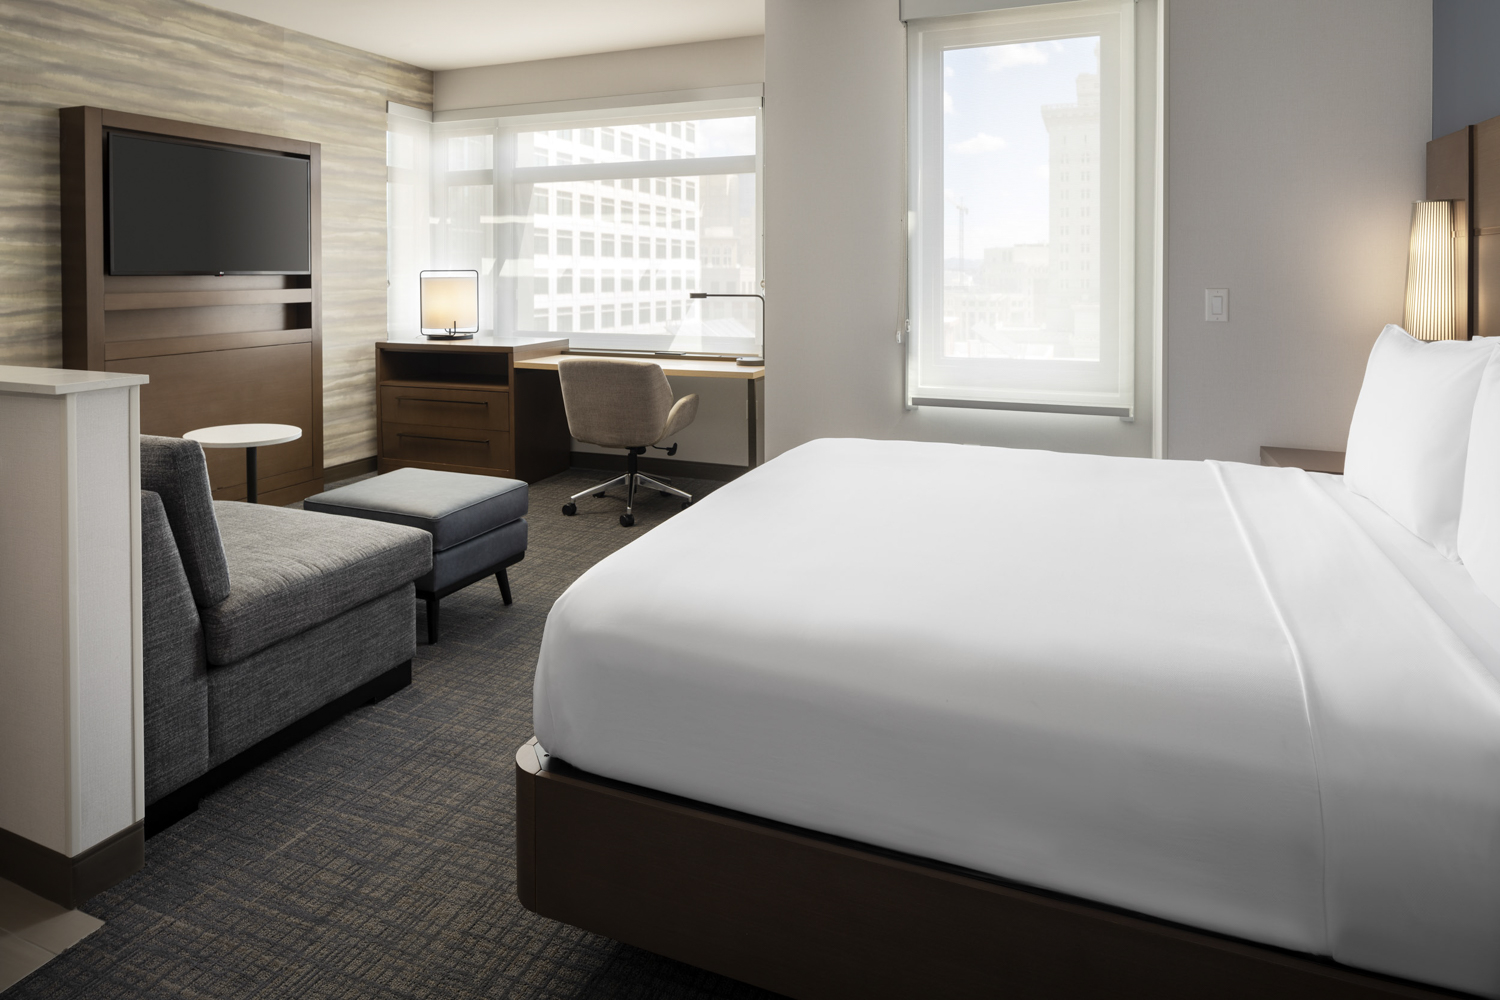 Residence Inn Studio Suite at 1431 Jefferson Street, image courtesy project team